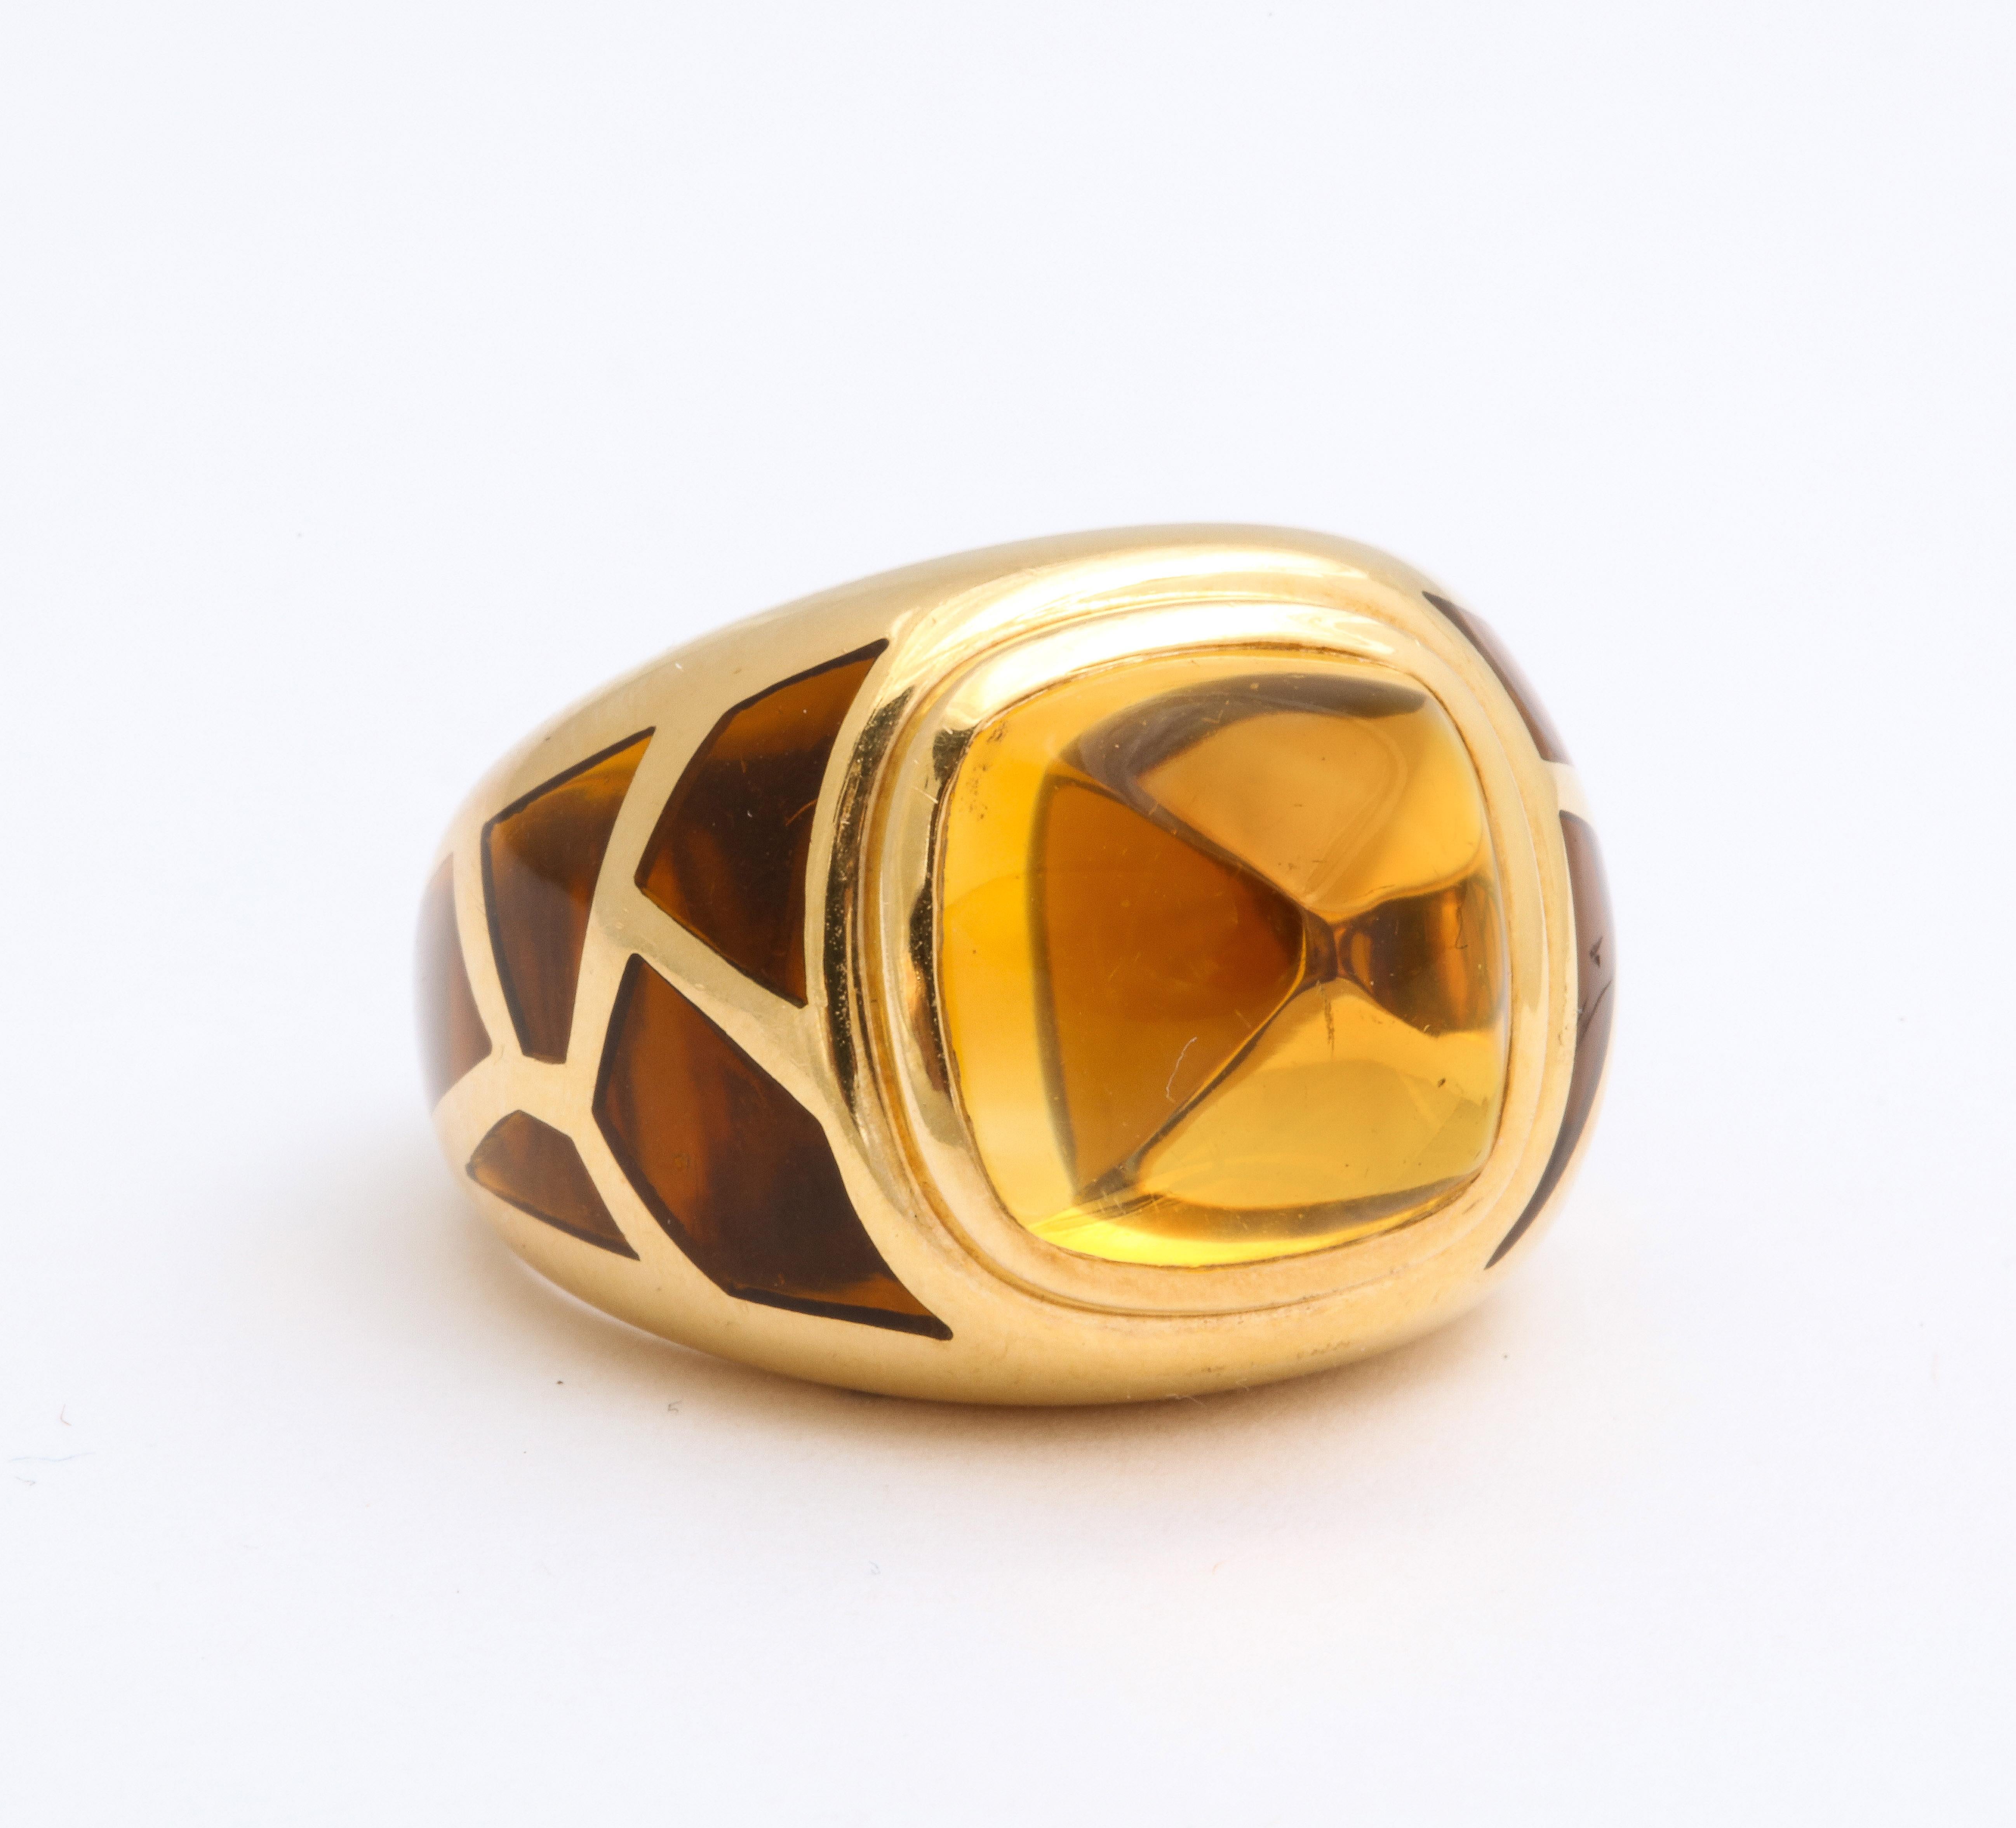 An exqusite  French dome ring with a sugarloaf citrine set in a 18 kt gold and  invisibly set panels of stones near a mosaic pattern with Boivin maker mark.